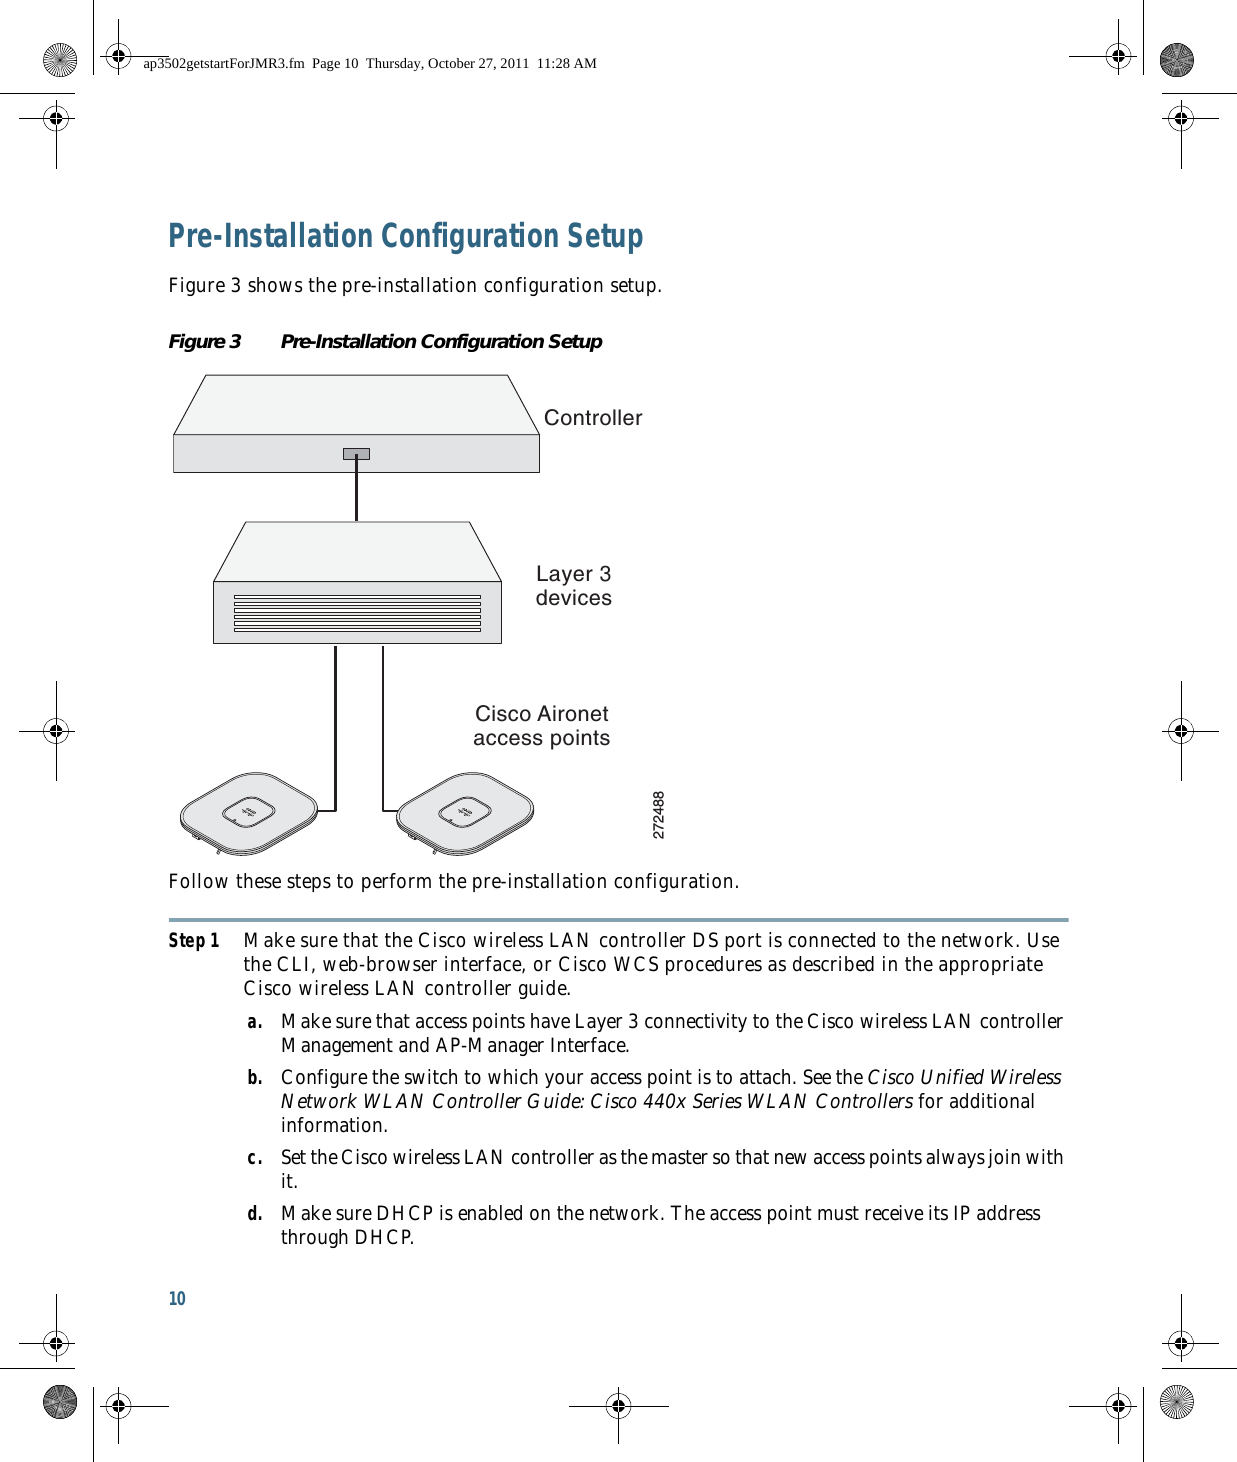 10 Pre-Installation Configuration SetupFigure 3 shows the pre-installation configuration setup.Figure 3 Pre-Installation Configuration Setup Follow these steps to perform the pre-installation configuration.Step 1 Make sure that the Cisco wireless LAN controller DS port is connected to the network. Use the CLI, web-browser interface, or Cisco WCS procedures as described in the appropriate Cisco wireless LAN controller guide.a. Make sure that access points have Layer 3 connectivity to the Cisco wireless LAN controller Management and AP-Manager Interface.b. Configure the switch to which your access point is to attach. See the Cisco Unified Wireless Network WLAN Controller Guide: Cisco 440x Series WLAN Controllers for additional information.c. Set the Cisco wireless LAN controller as the master so that new access points always join with it.d. Make sure DHCP is enabled on the network. The access point must receive its IP address through DHCP.ControllerLayer 3devicesCisco Aironetaccess points272488ap3502getstartForJMR3.fm  Page 10  Thursday, October 27, 2011  11:28 AM